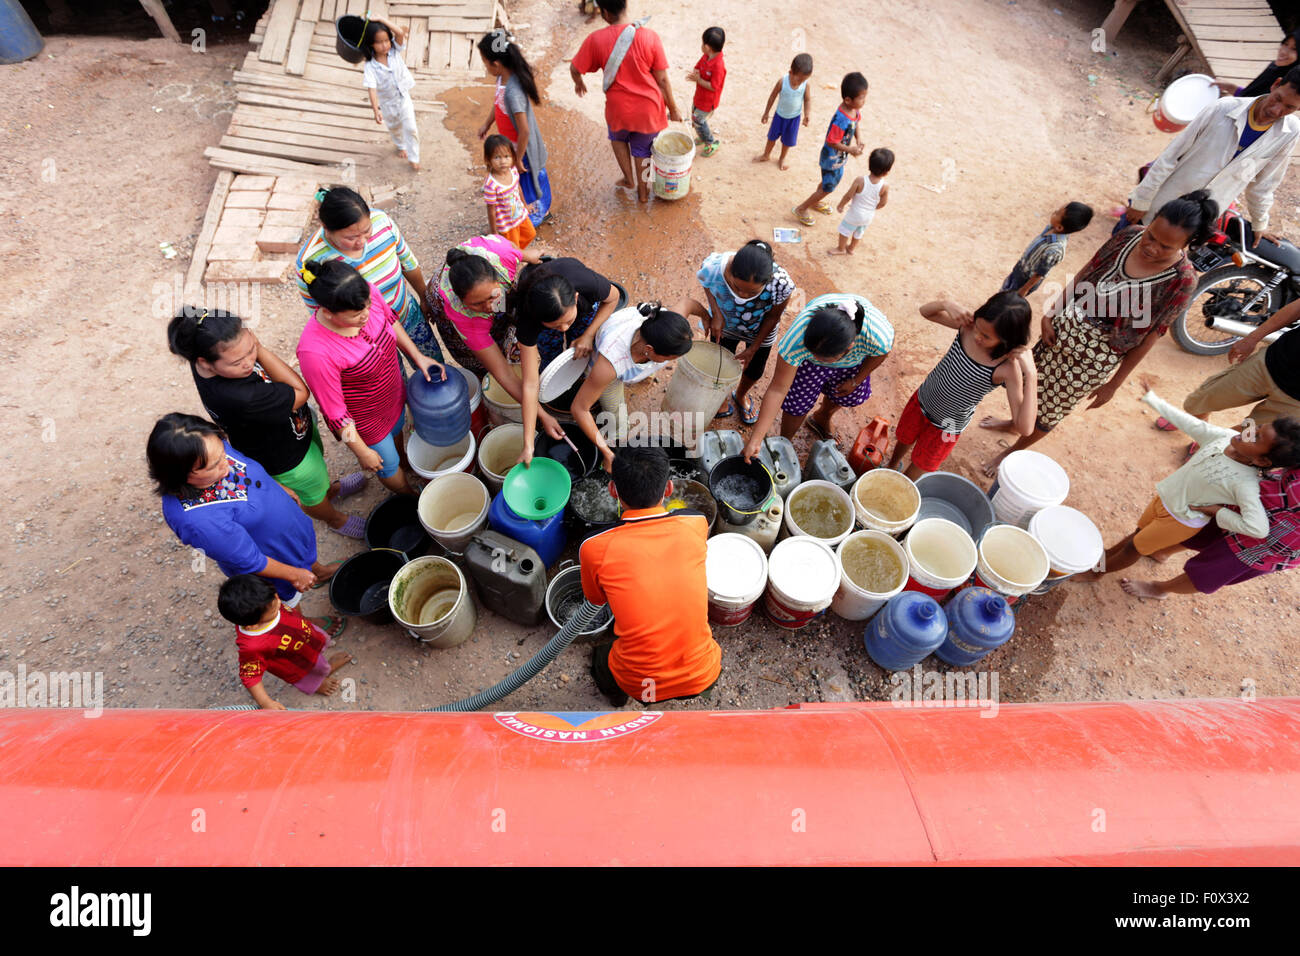 Palembang, Indonesia. 21st Aug, 2015. People queue up to get water from BPBD (Regional Disaster Management Agency), which distribute 3,000 liters to 9,000 liters one day to a number of remote villages that suffered a long drought in Ogan Ilir, South Sumatra, Indonesia, on Aug. 21, 2015. © Nova Wahyudi/Xinhua/Alamy Live News Stock Photo